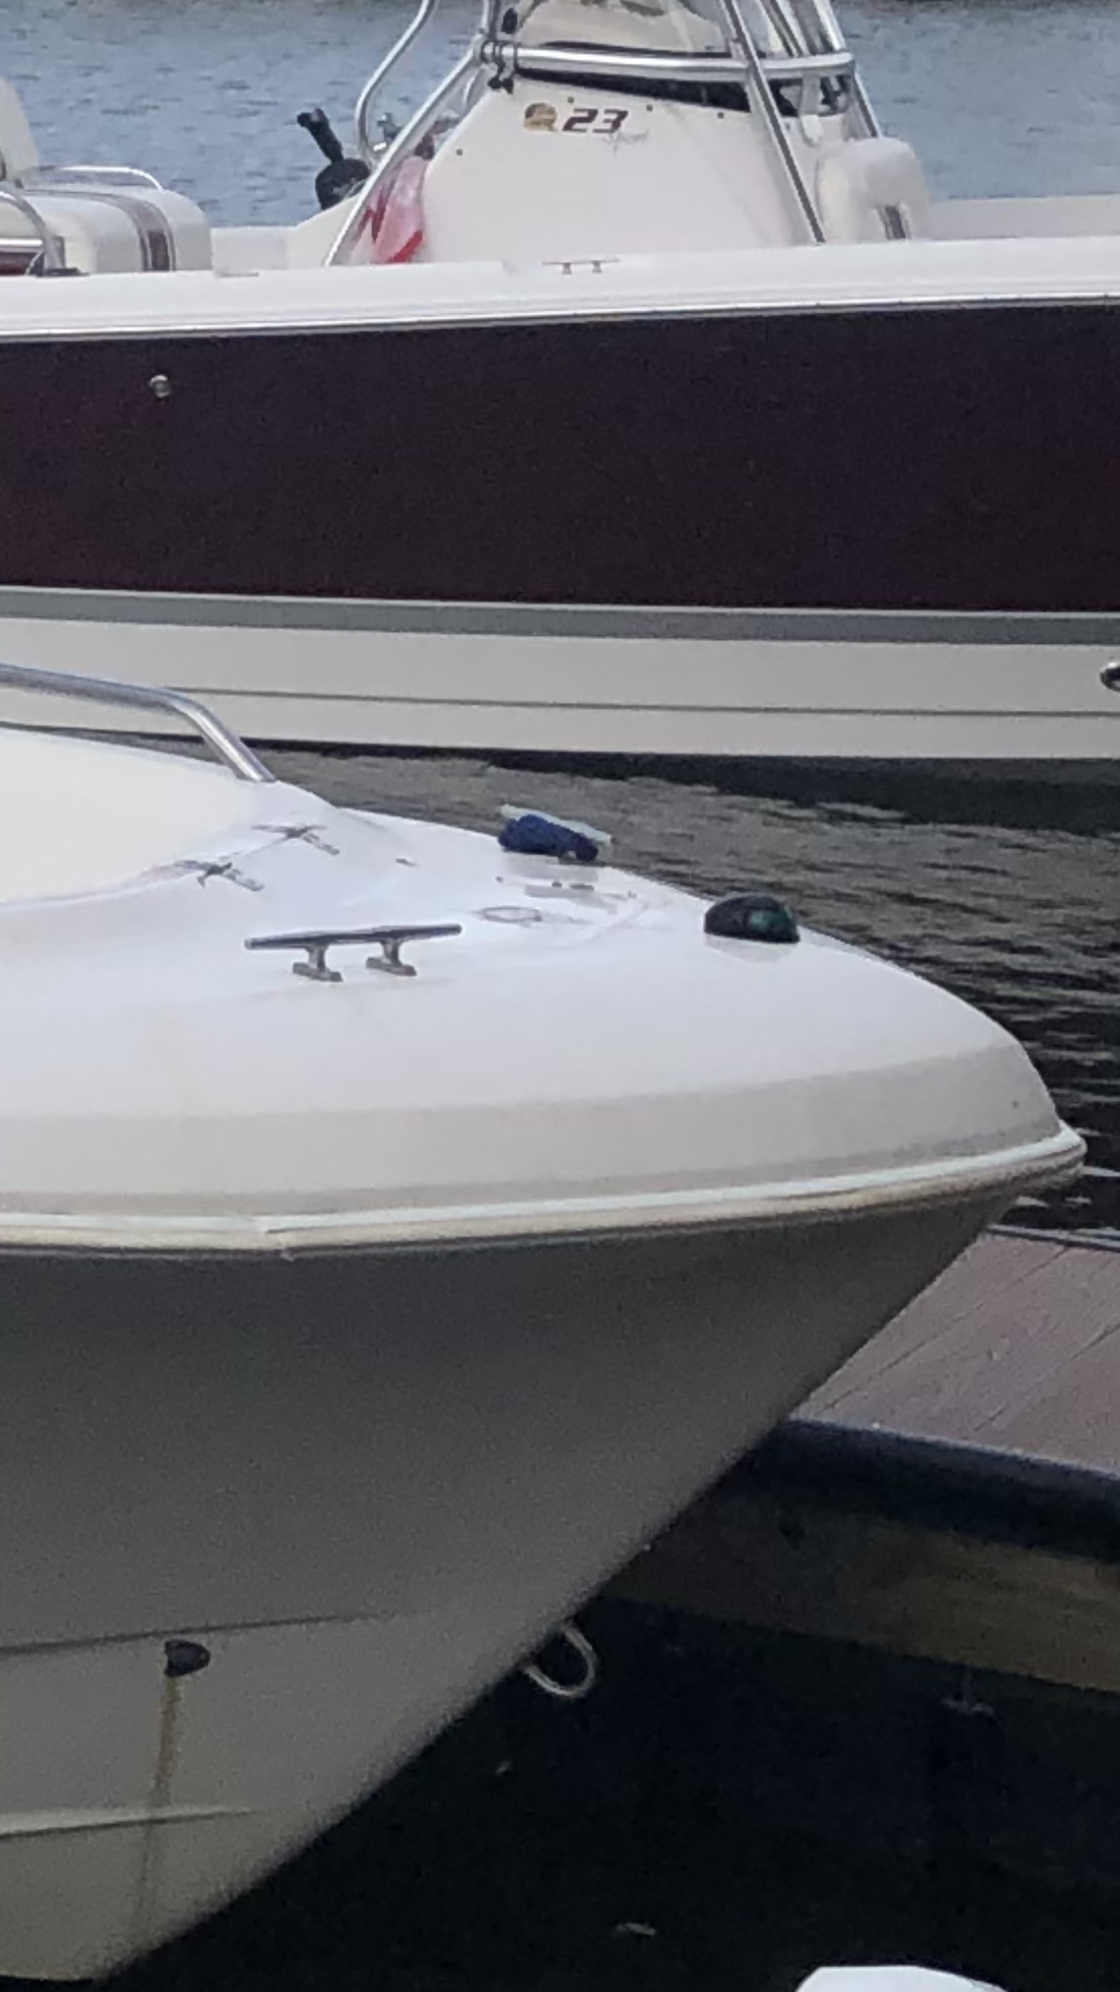 Warning stickers on new boat - The Hull Truth - Boating and